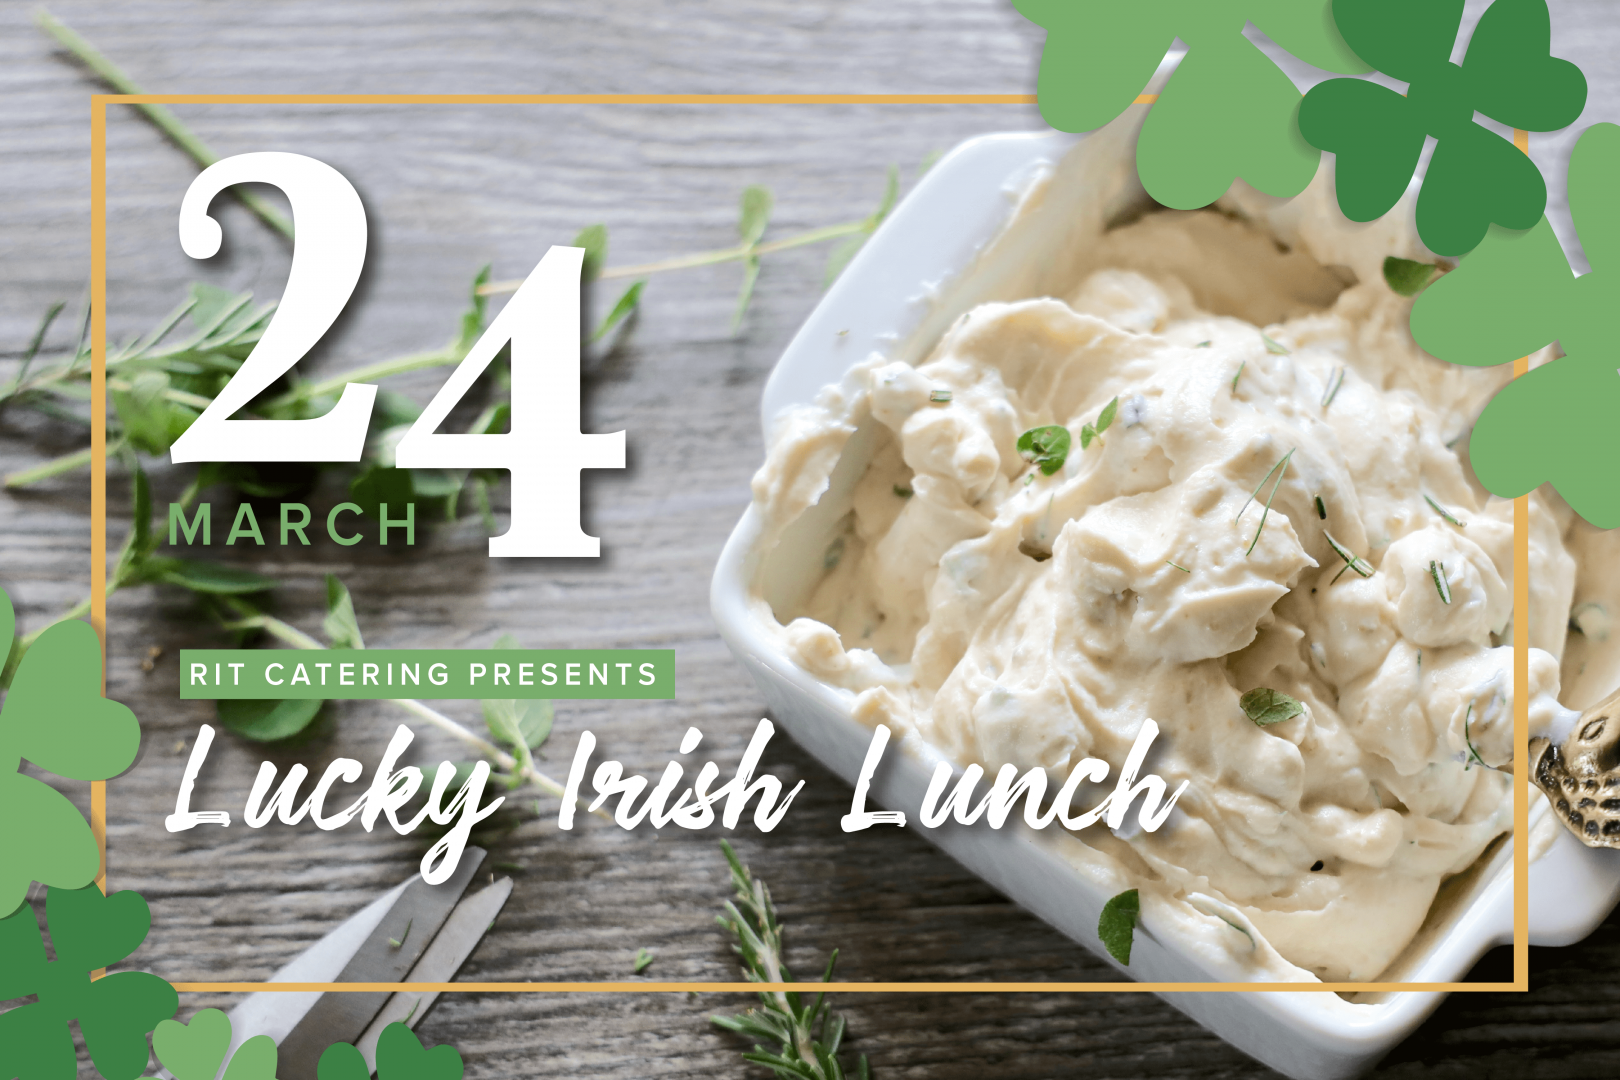 image of dip in a container with four leaf clovers around the boarder and text saying "March 24 RIT Catering Presents Lucky Irish Lunch